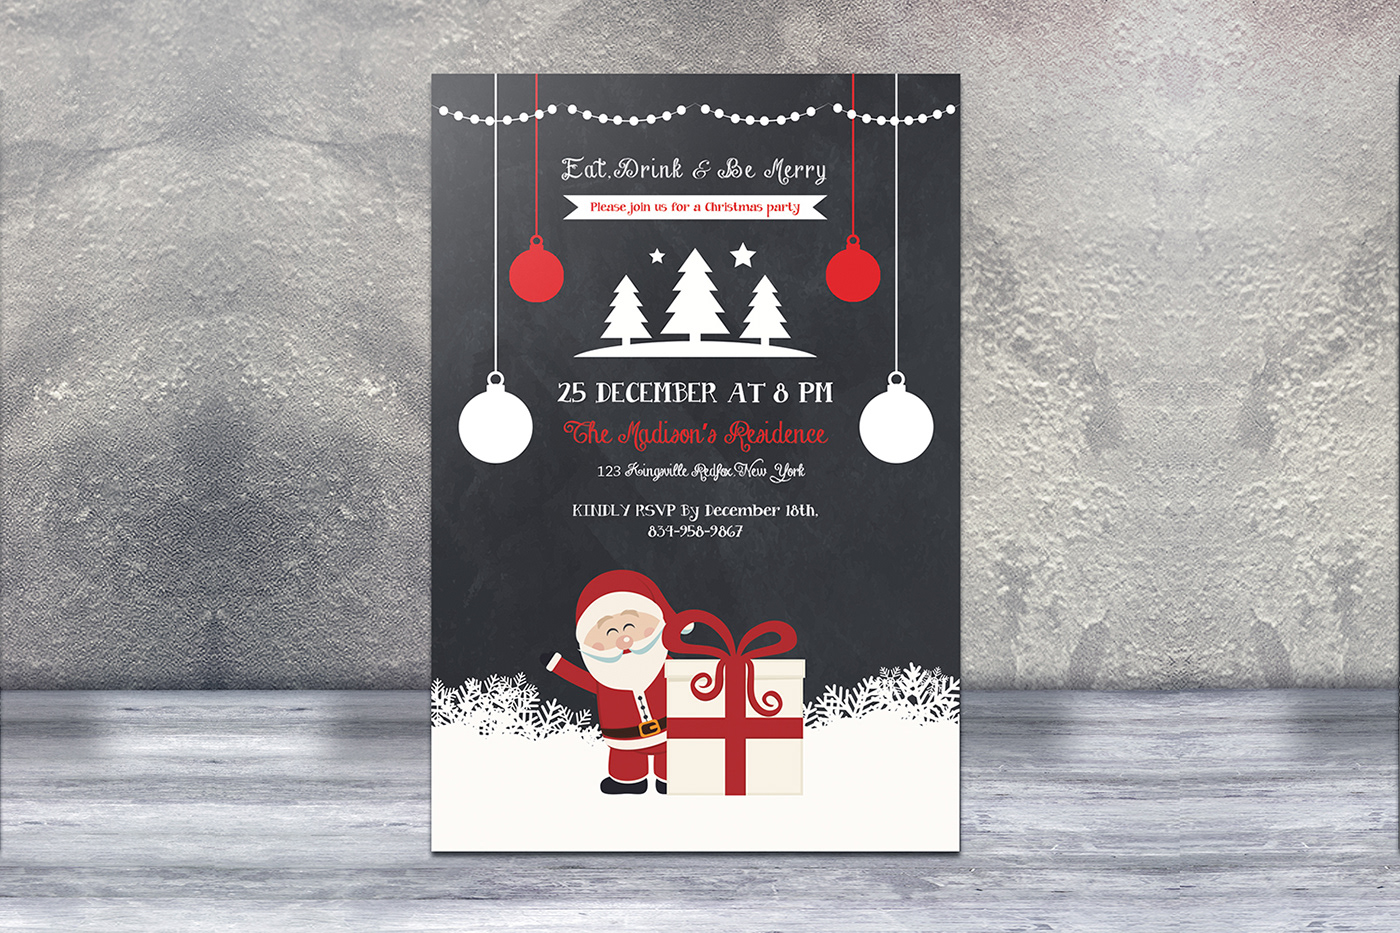 Christmas party flyer Invitation card club ms word photoshop